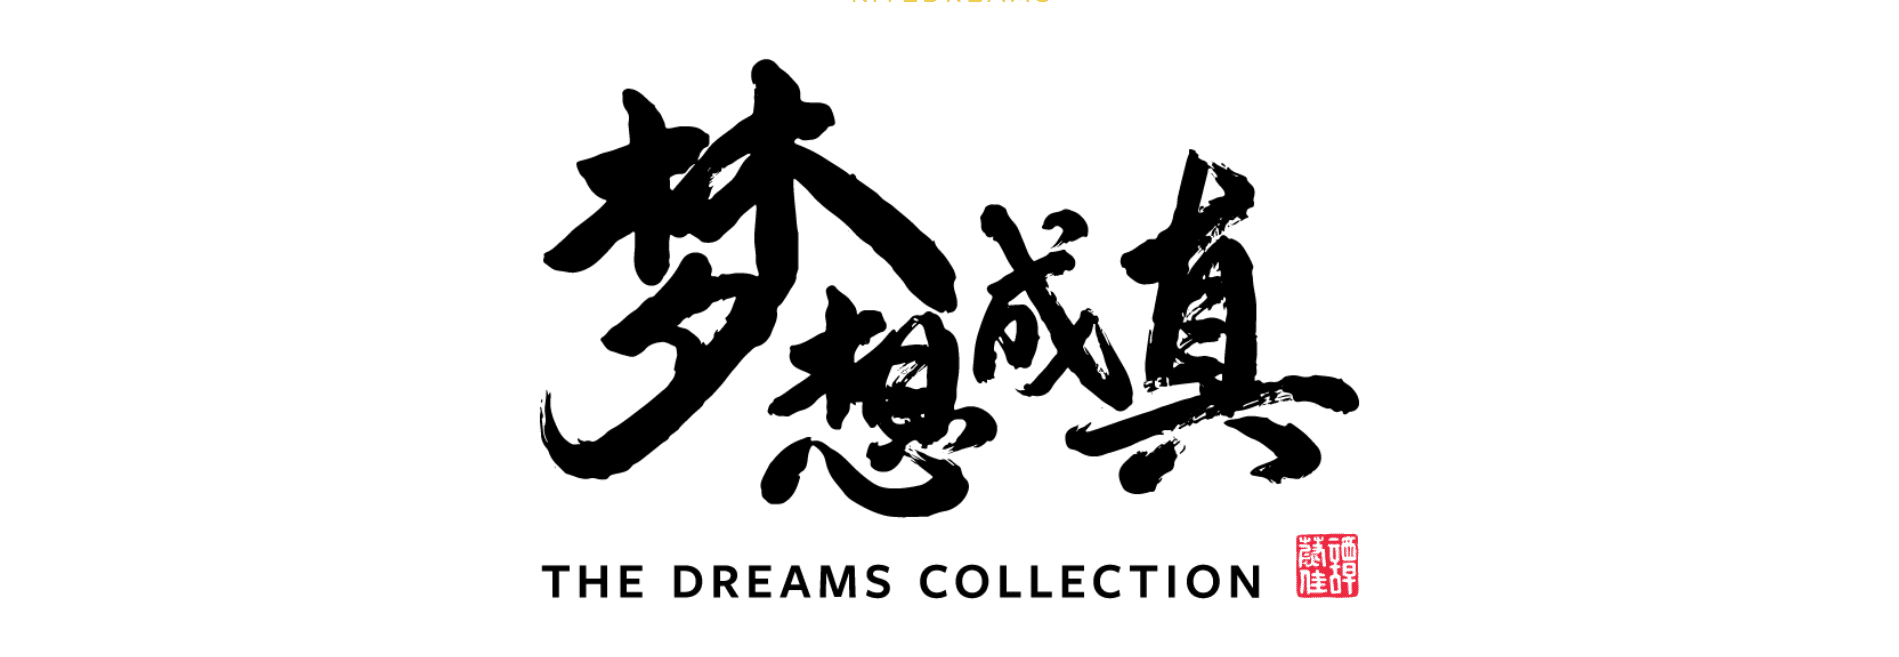 Dream Collection